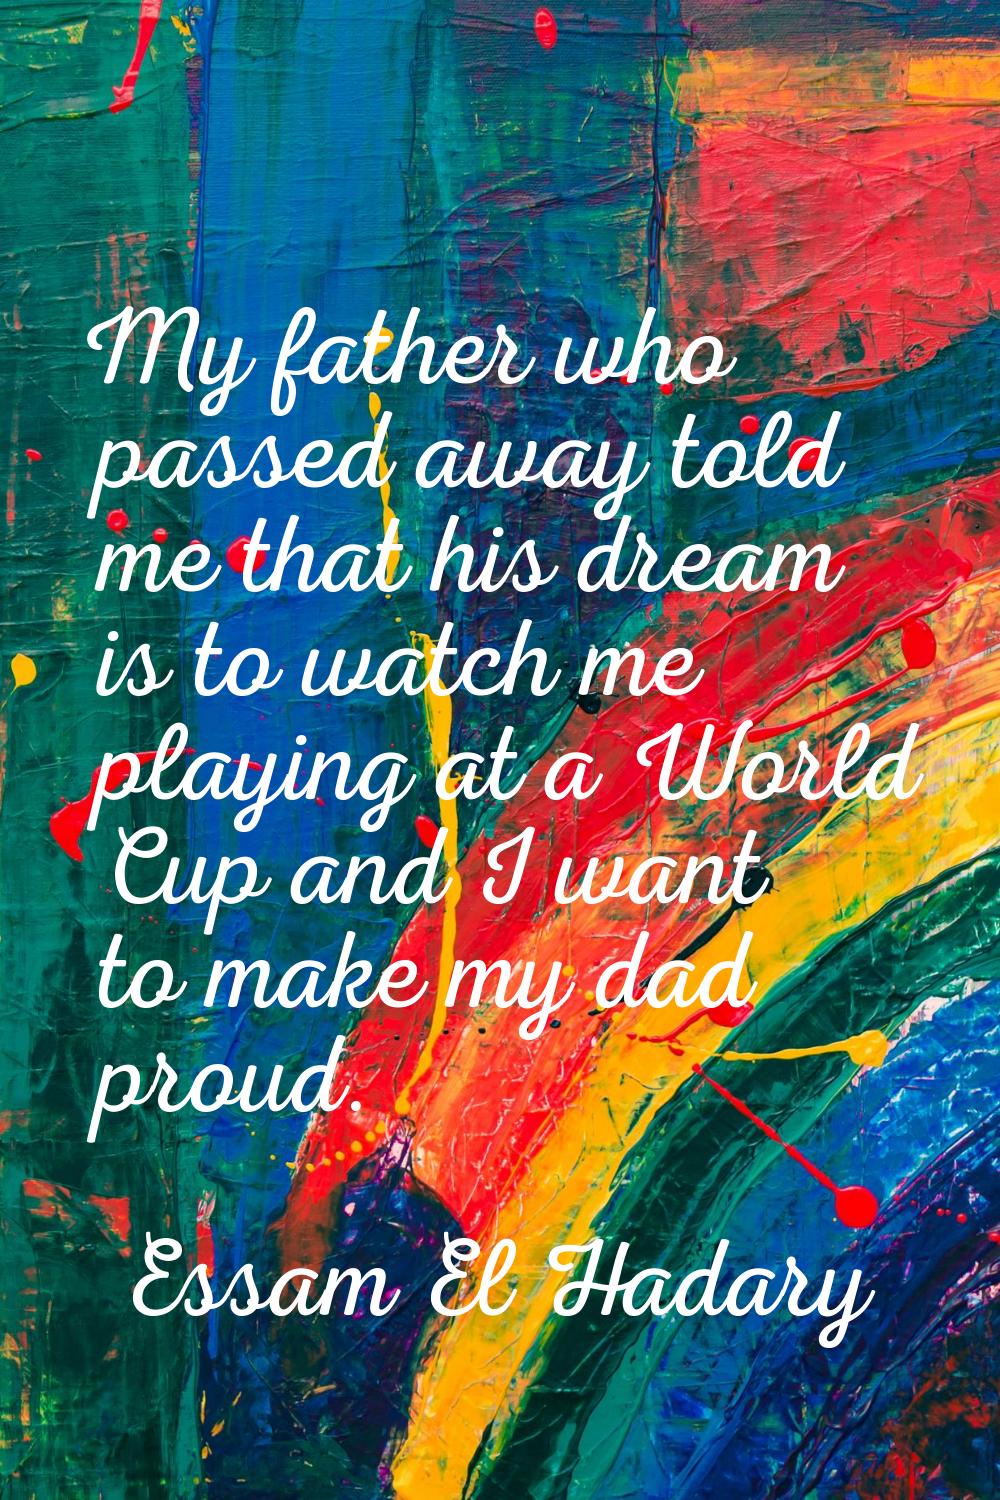 My father who passed away told me that his dream is to watch me playing at a World Cup and I want t